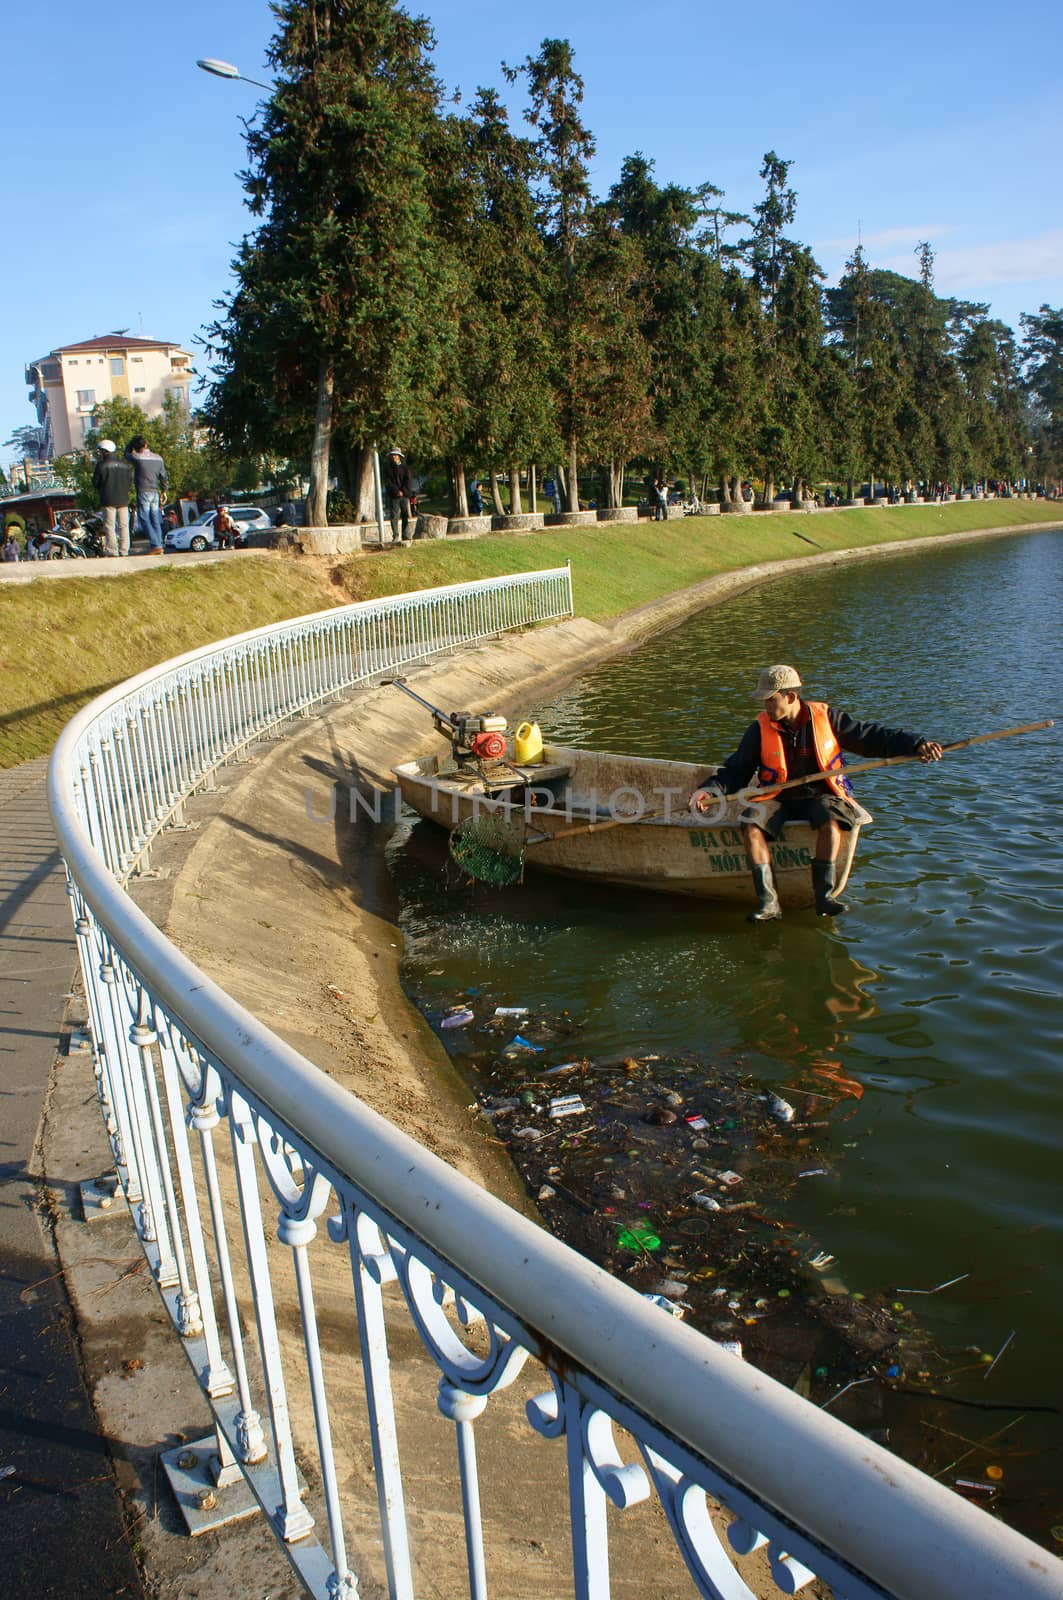 DA LAT, VIET NAM- DEC 29: Vietnamese sanitation worker working on Xuan Huong lake, he's  sit on boat and pick up trash from surface water to clean up the lake in Dalat, Vietnam on Dec 29, 2013